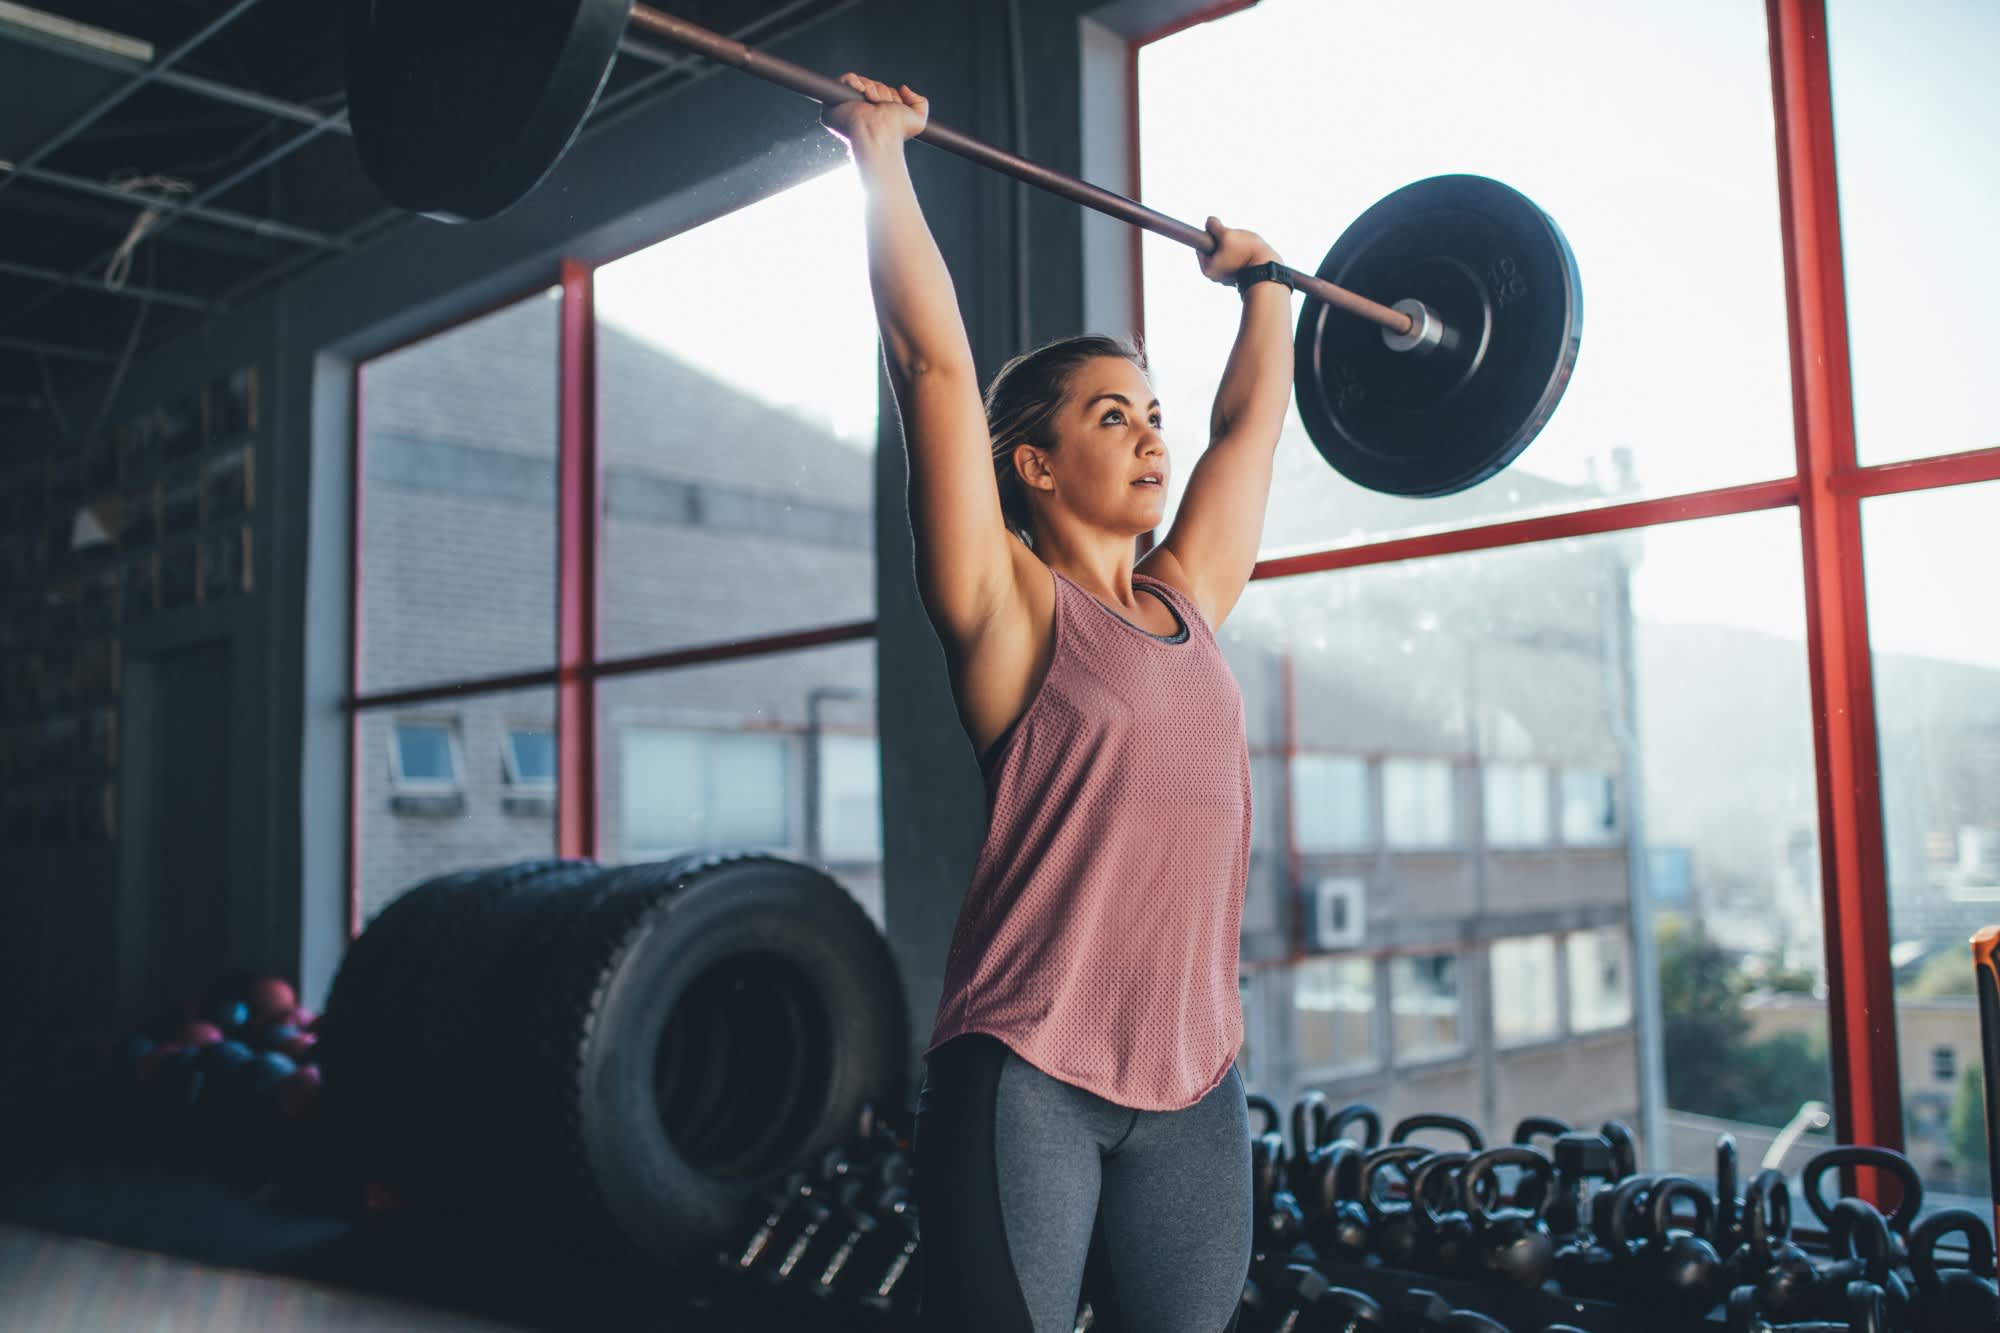 Weight-lifting tips for beginners, from a woman who deadlifts 300 lbs